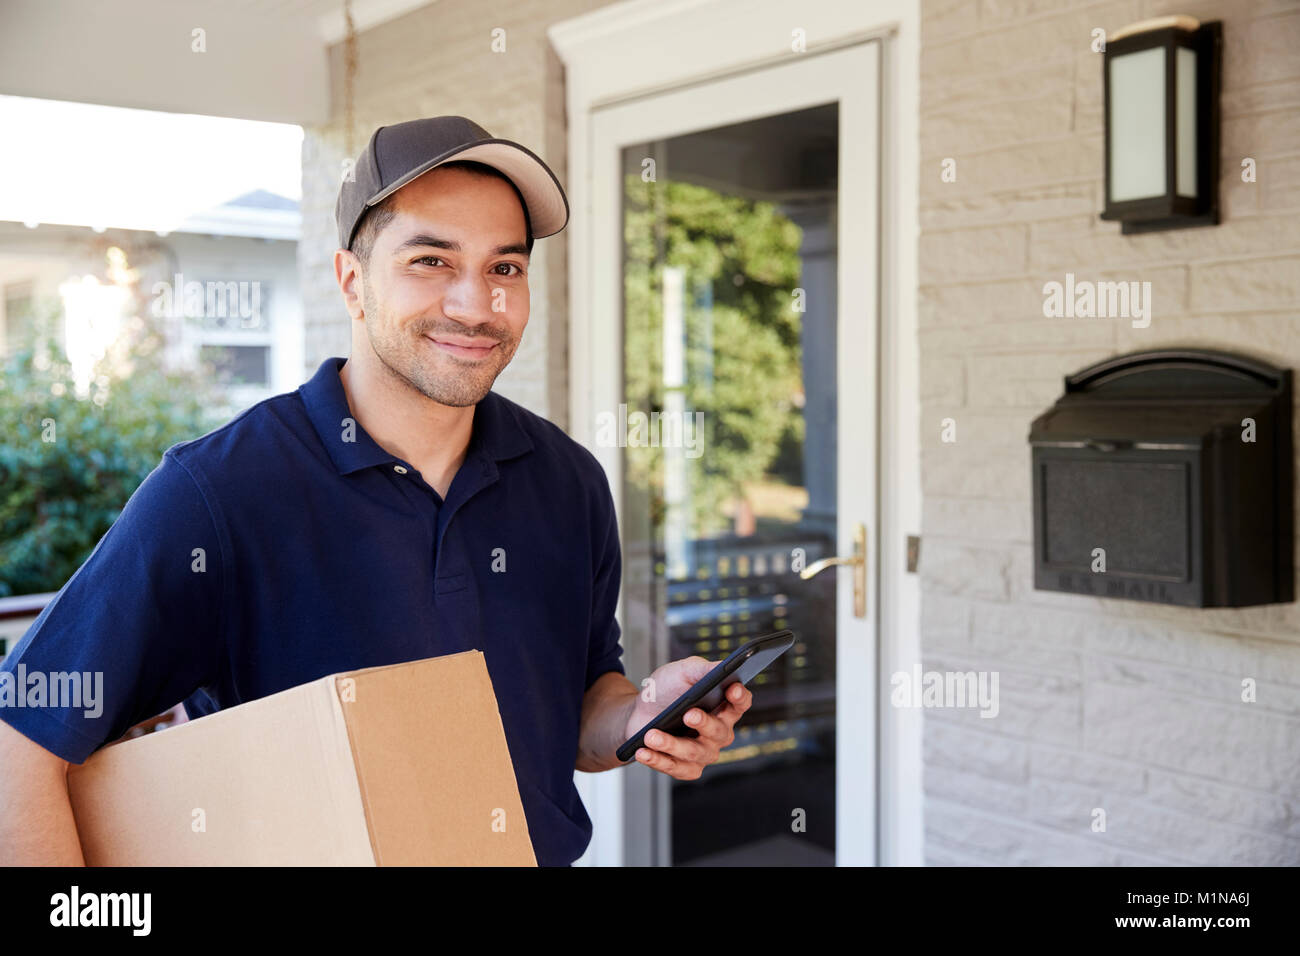 Portrait Of Courier With Digital Tablet Delivering Package Stock Photo